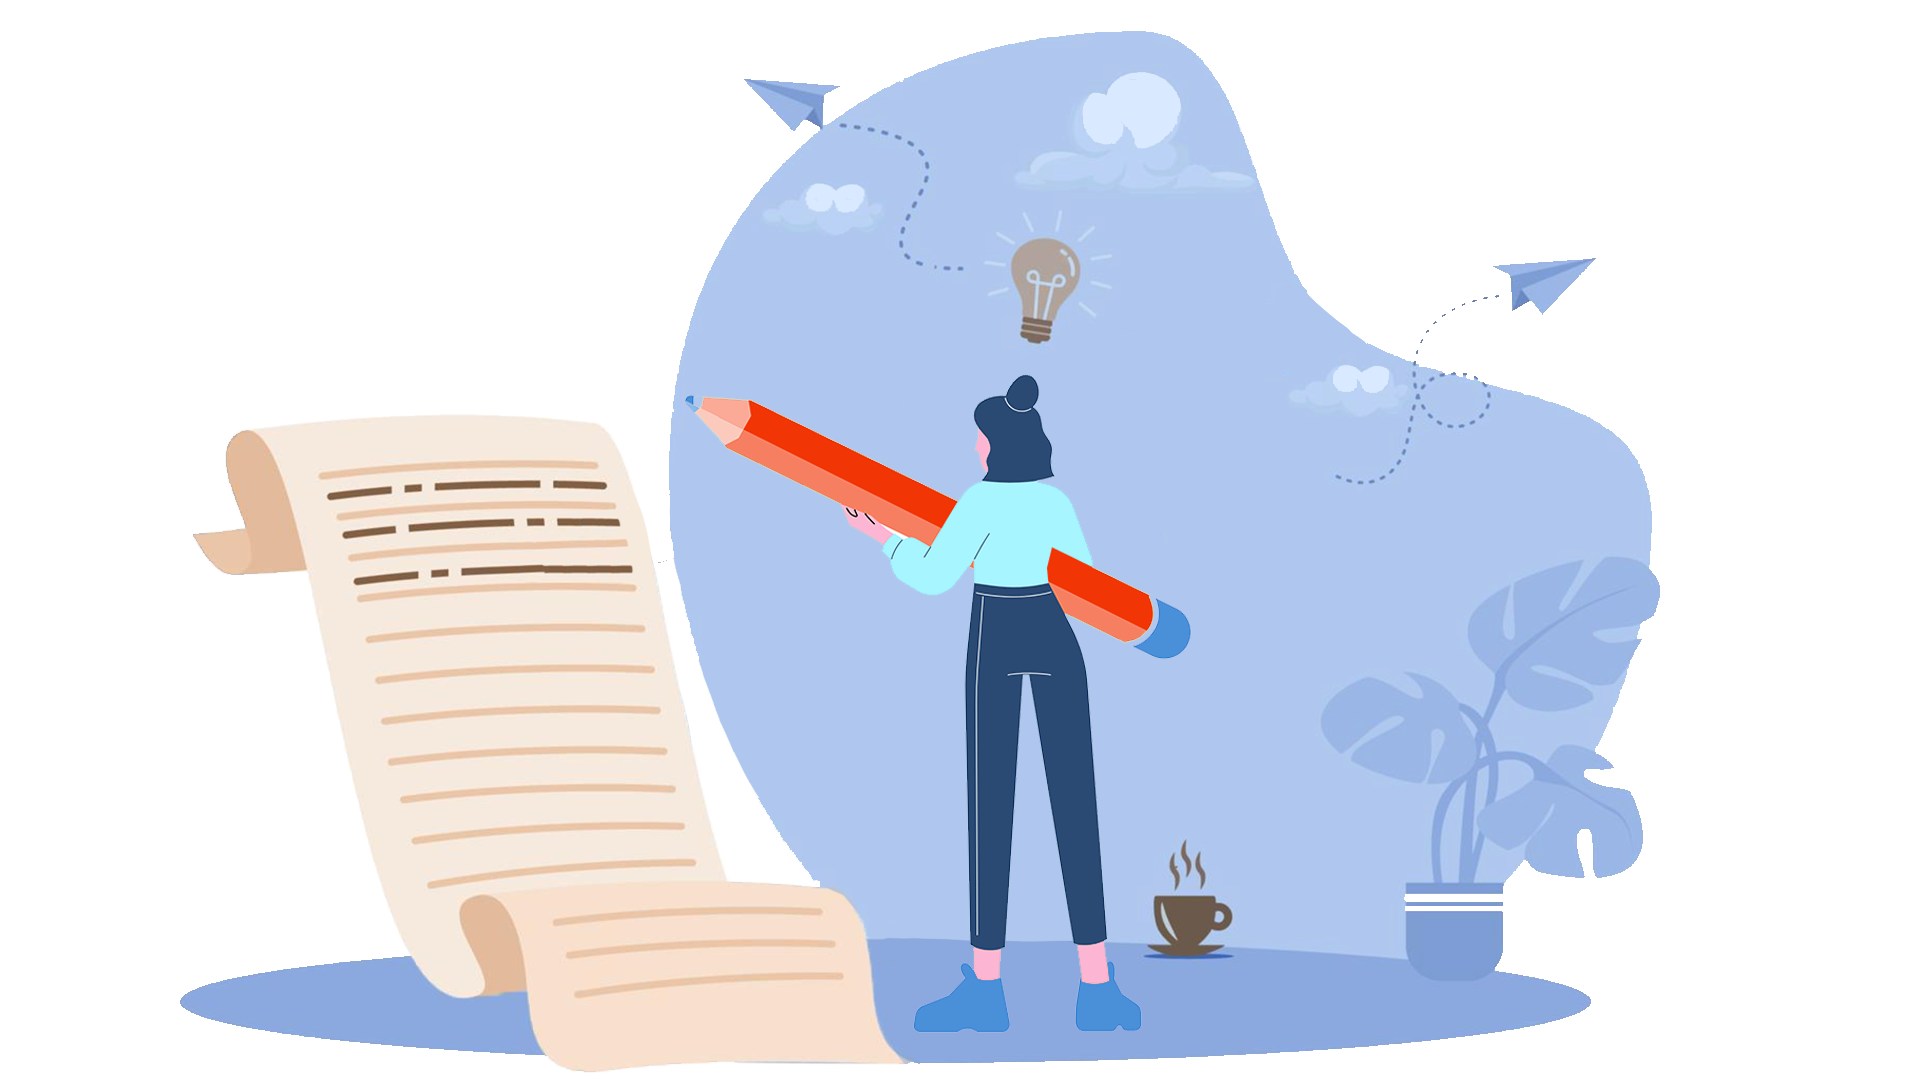 A vector illustration of a girl holding a pen and optimizing content on a piece of paper.